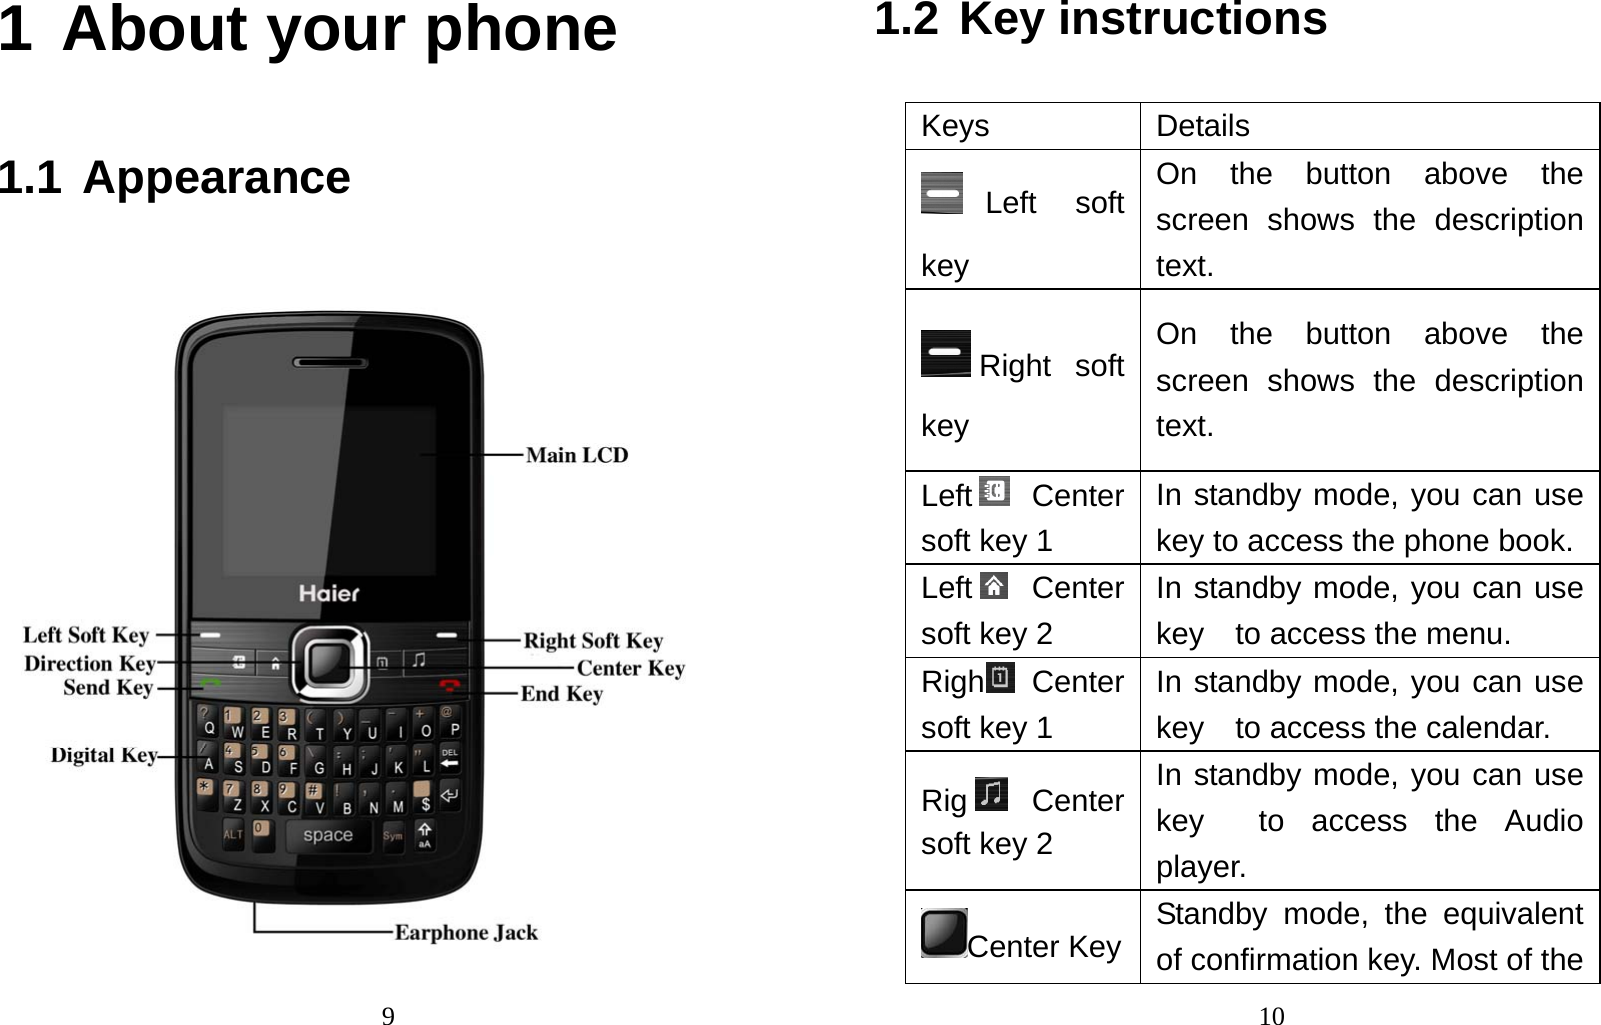                                91 About your phone   1.1 Appearance                                 101.2 Key instructions Keys Details Left soft key On the button above the screen shows the description text. Right soft key  On the button above the screen shows the description text. Left  Center soft key 1 In standby mode, you can use key to access the phone book. Left  Center soft key 2 In standby mode, you can use key    to access the menu. Righ  Center soft key 1 In standby mode, you can use key    to access the calendar. Rig  Center soft key 2 In standby mode, you can use key  to access the Audio player. Center Key Standby mode, the equivalent of confirmation key. Most of the 